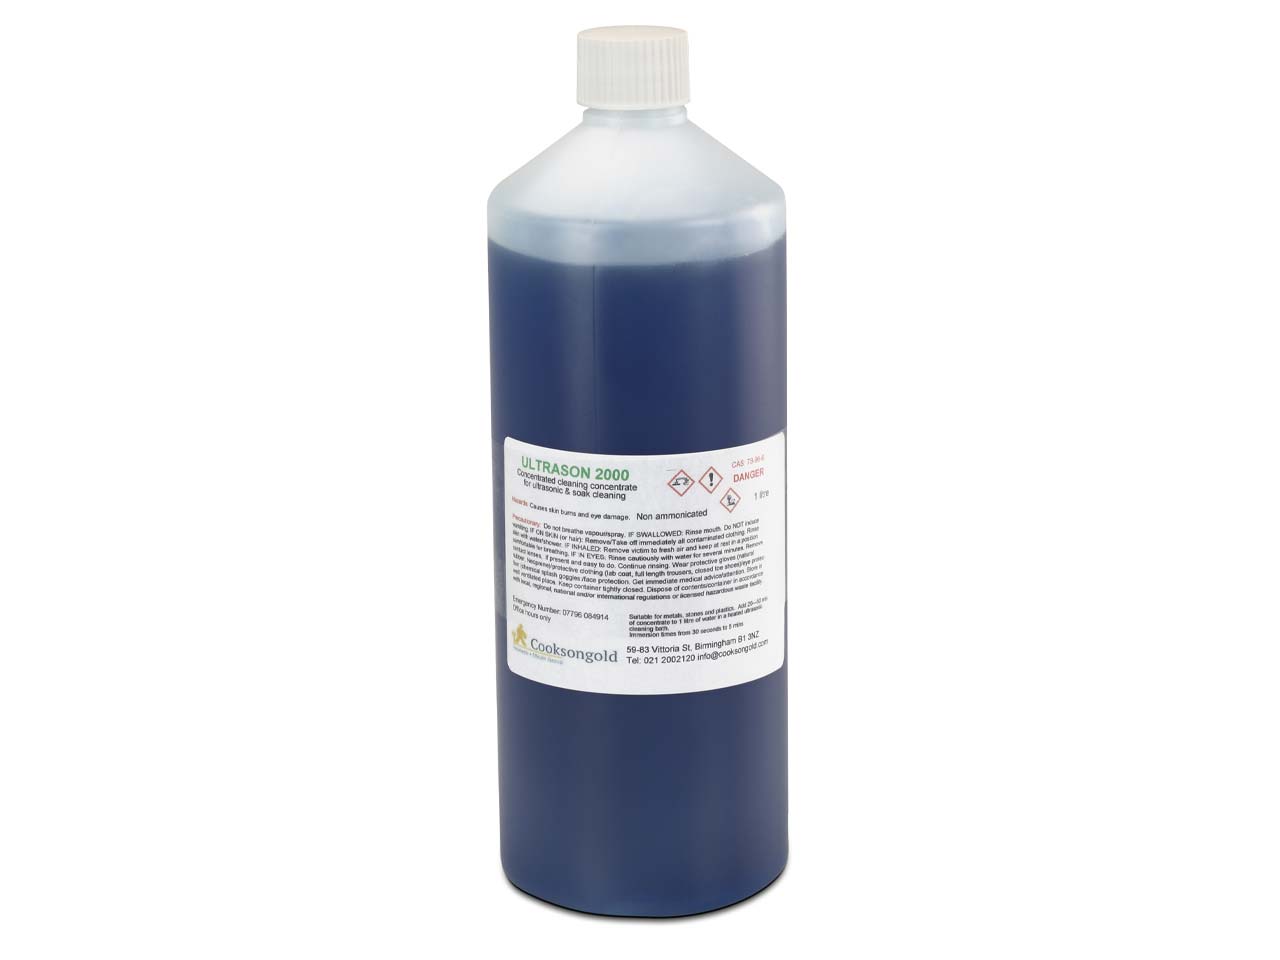 Ultrasonic 2000 Cleaning Fluid 1 Litre Biodegradable For Ultrasonic, Un2735 Questions & Answers